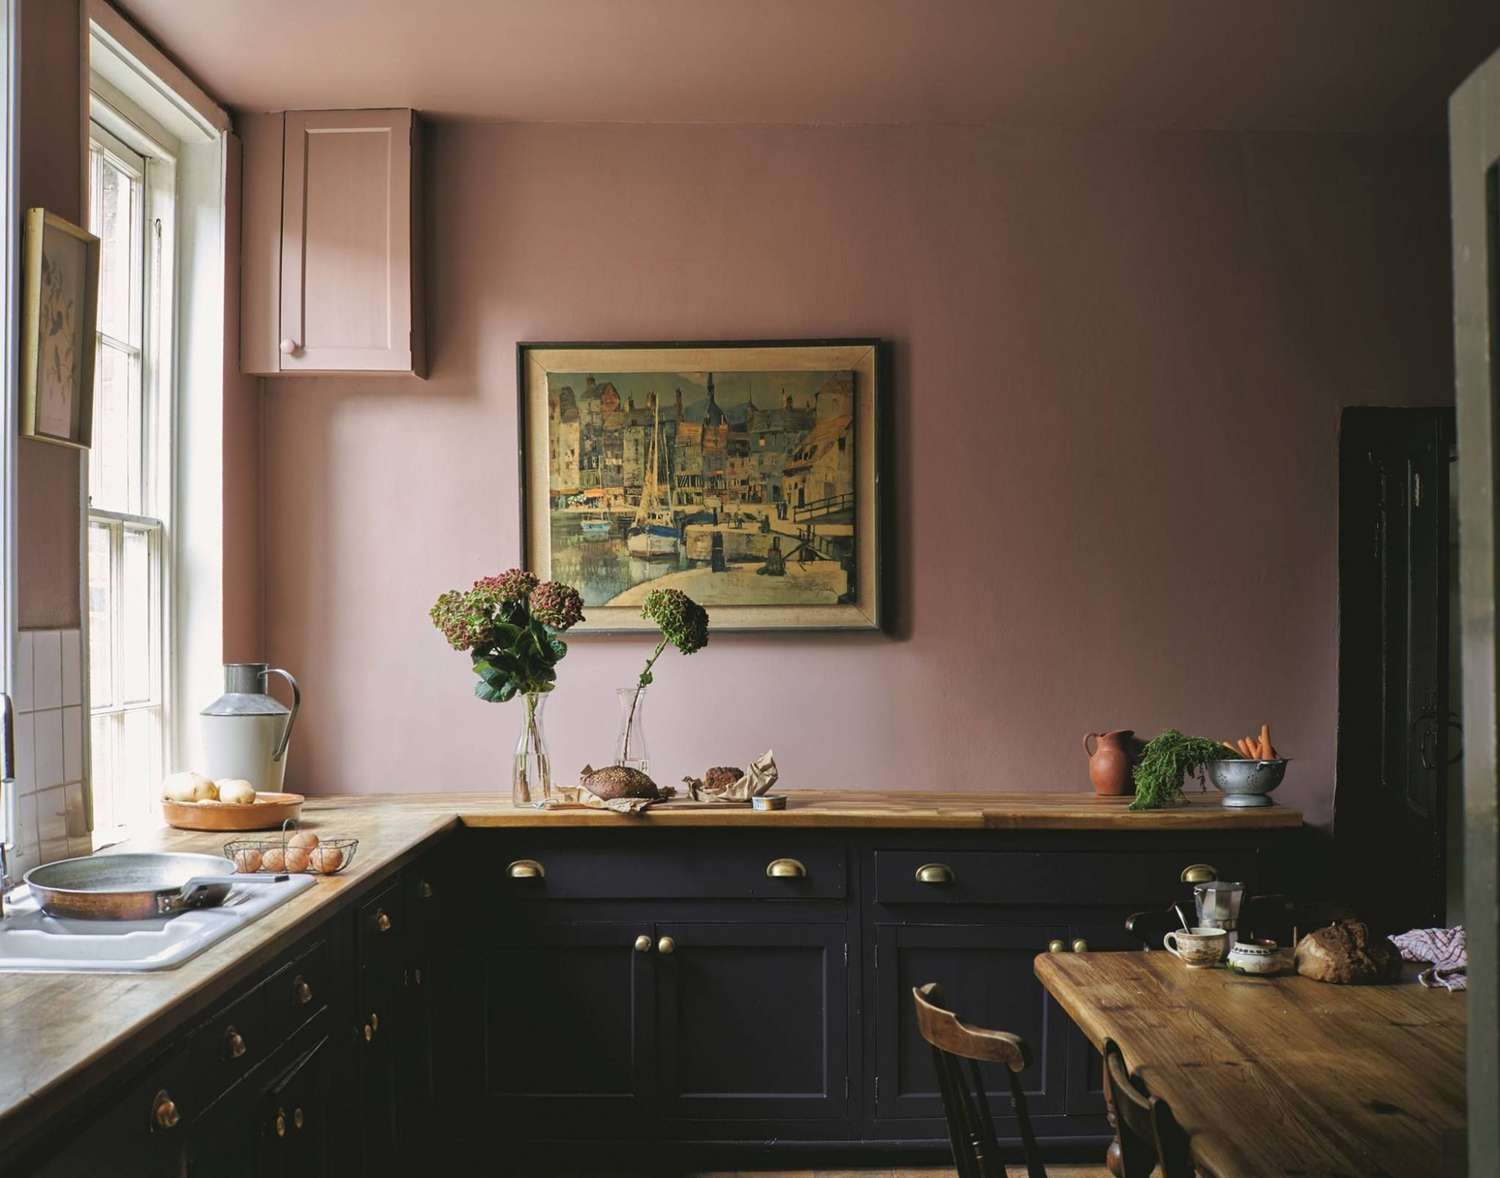 Rose pink and black kitchen cabinets